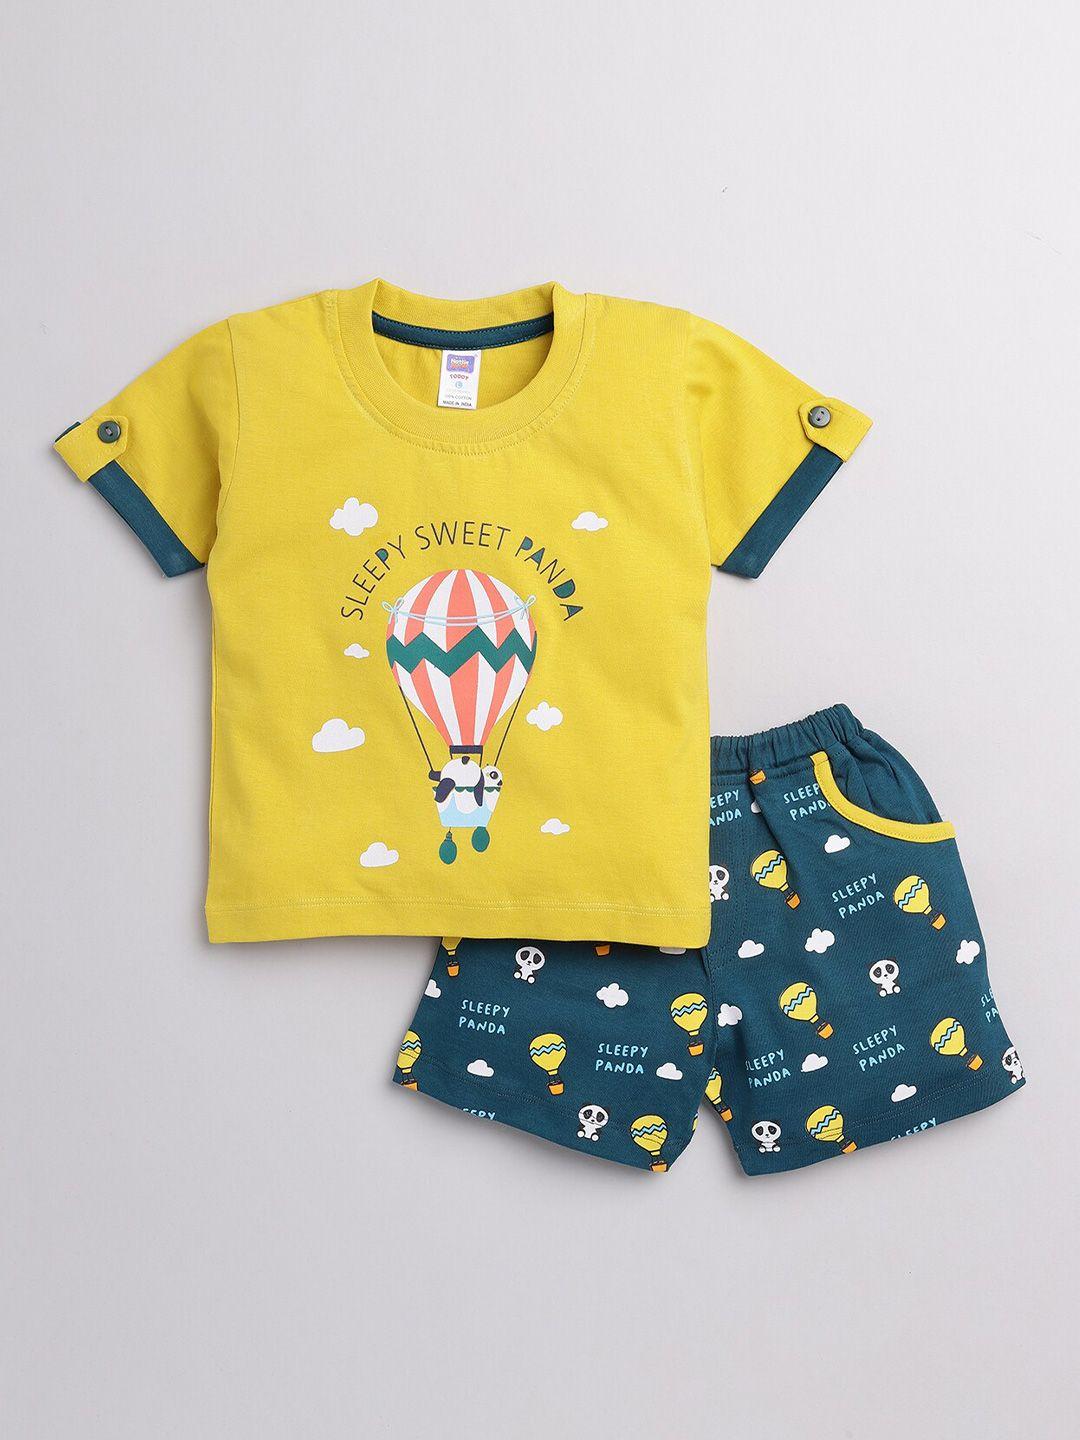 nottie planet boys mustard yellow & green printed pure cotton co-ords